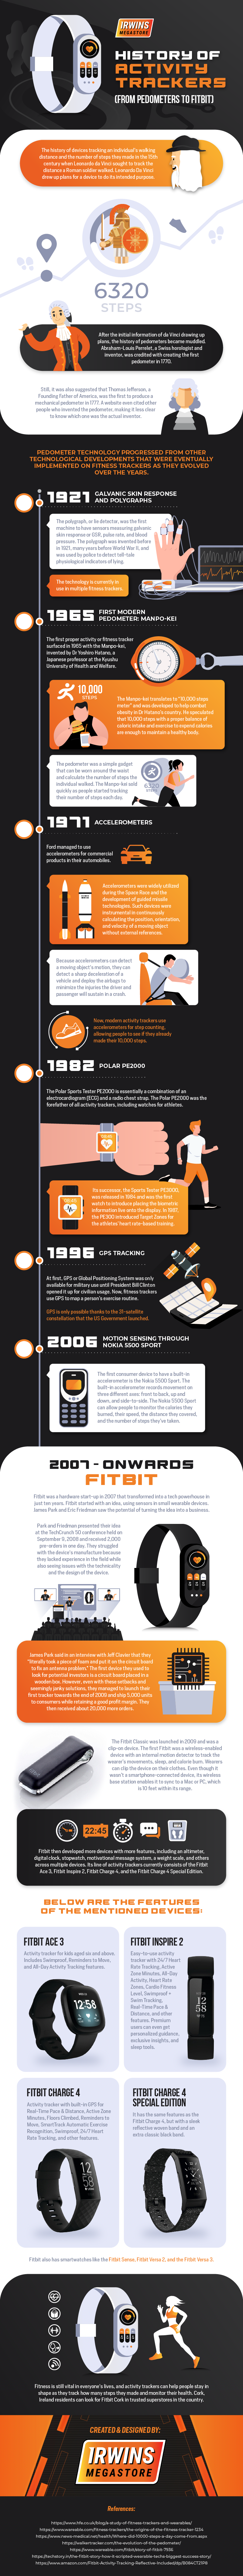 History of Activity Trackers (From Pedometers to Fitbit)